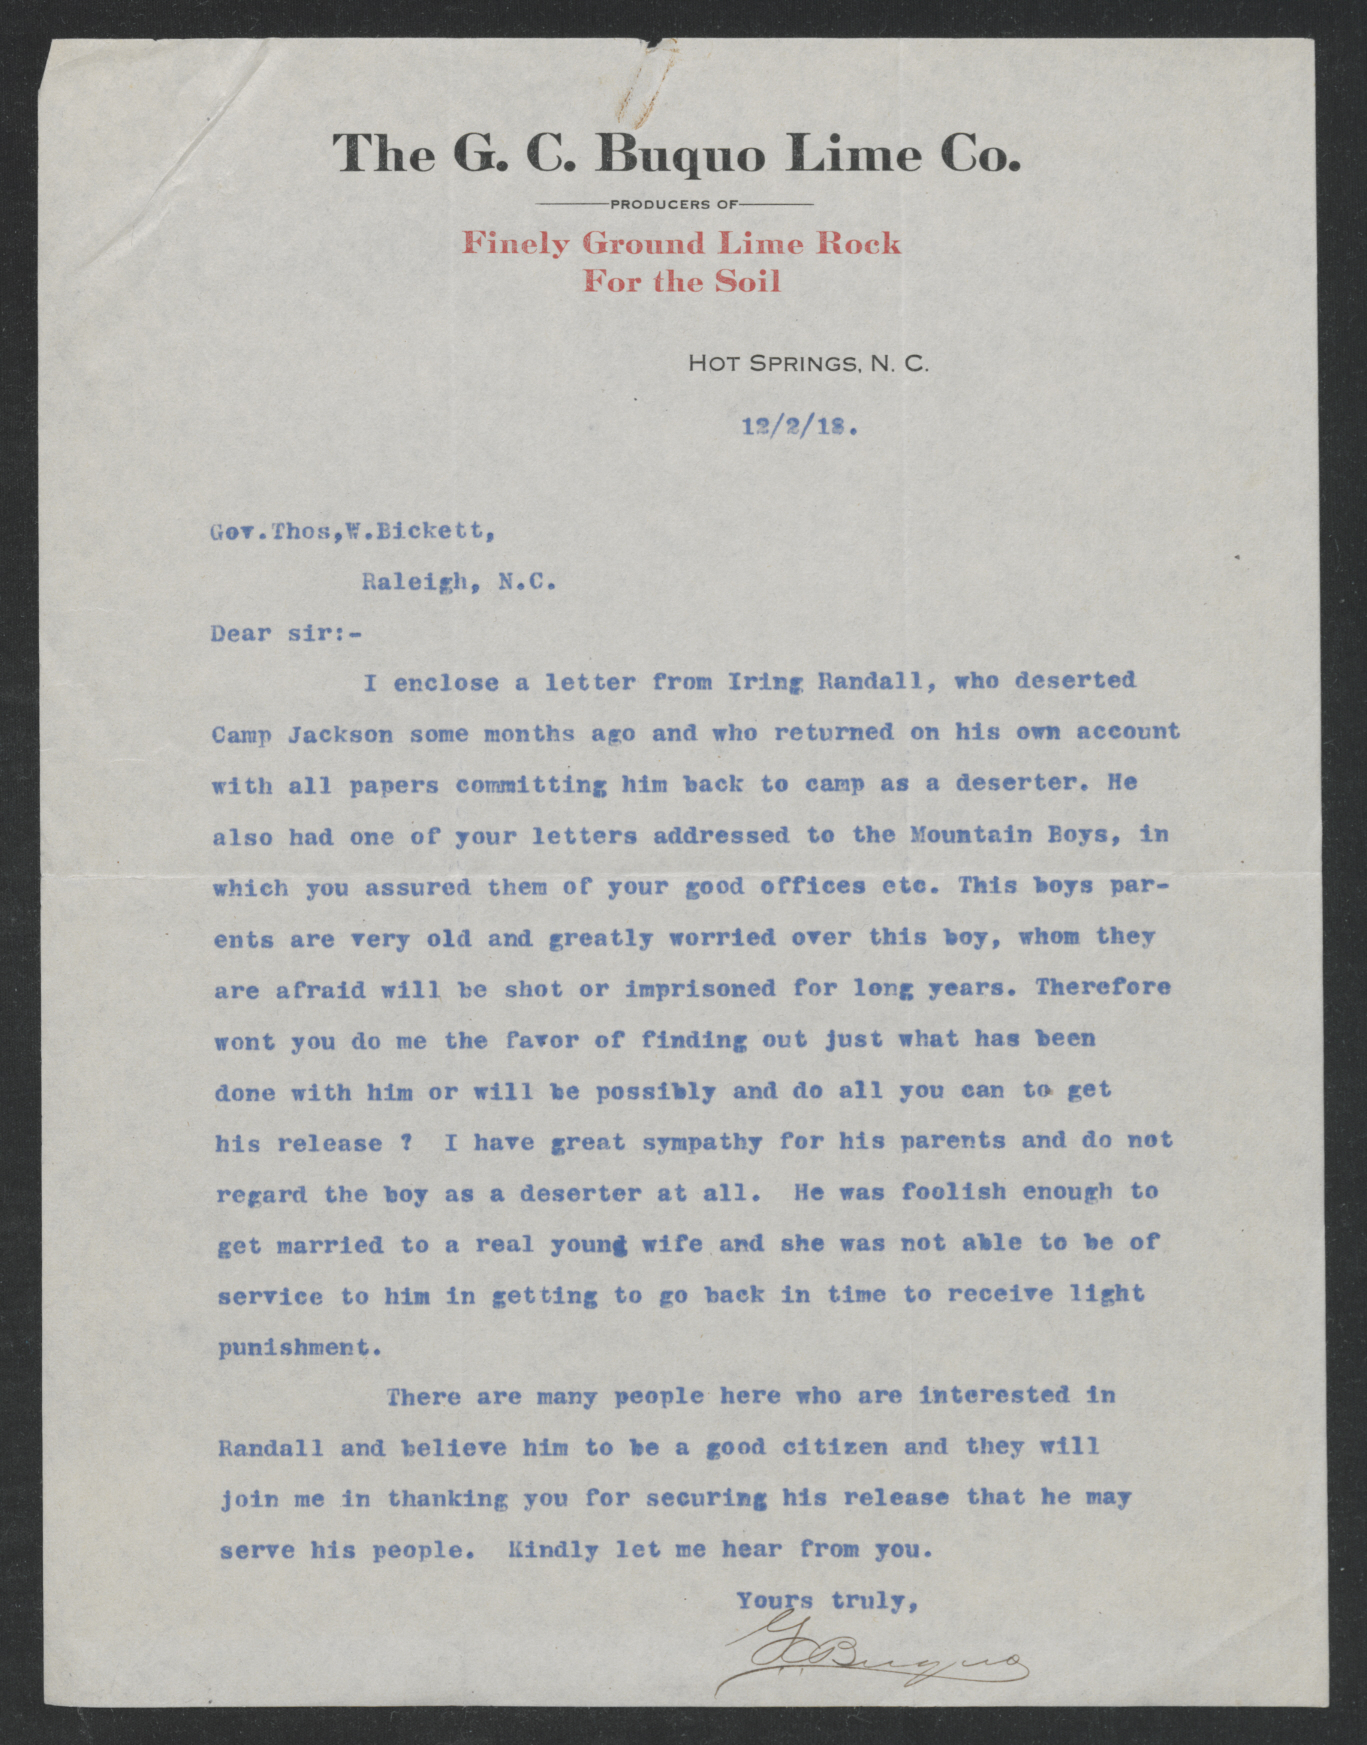 Letter from George C. Buquo to Thomas W. Bickett, December 2, 1918